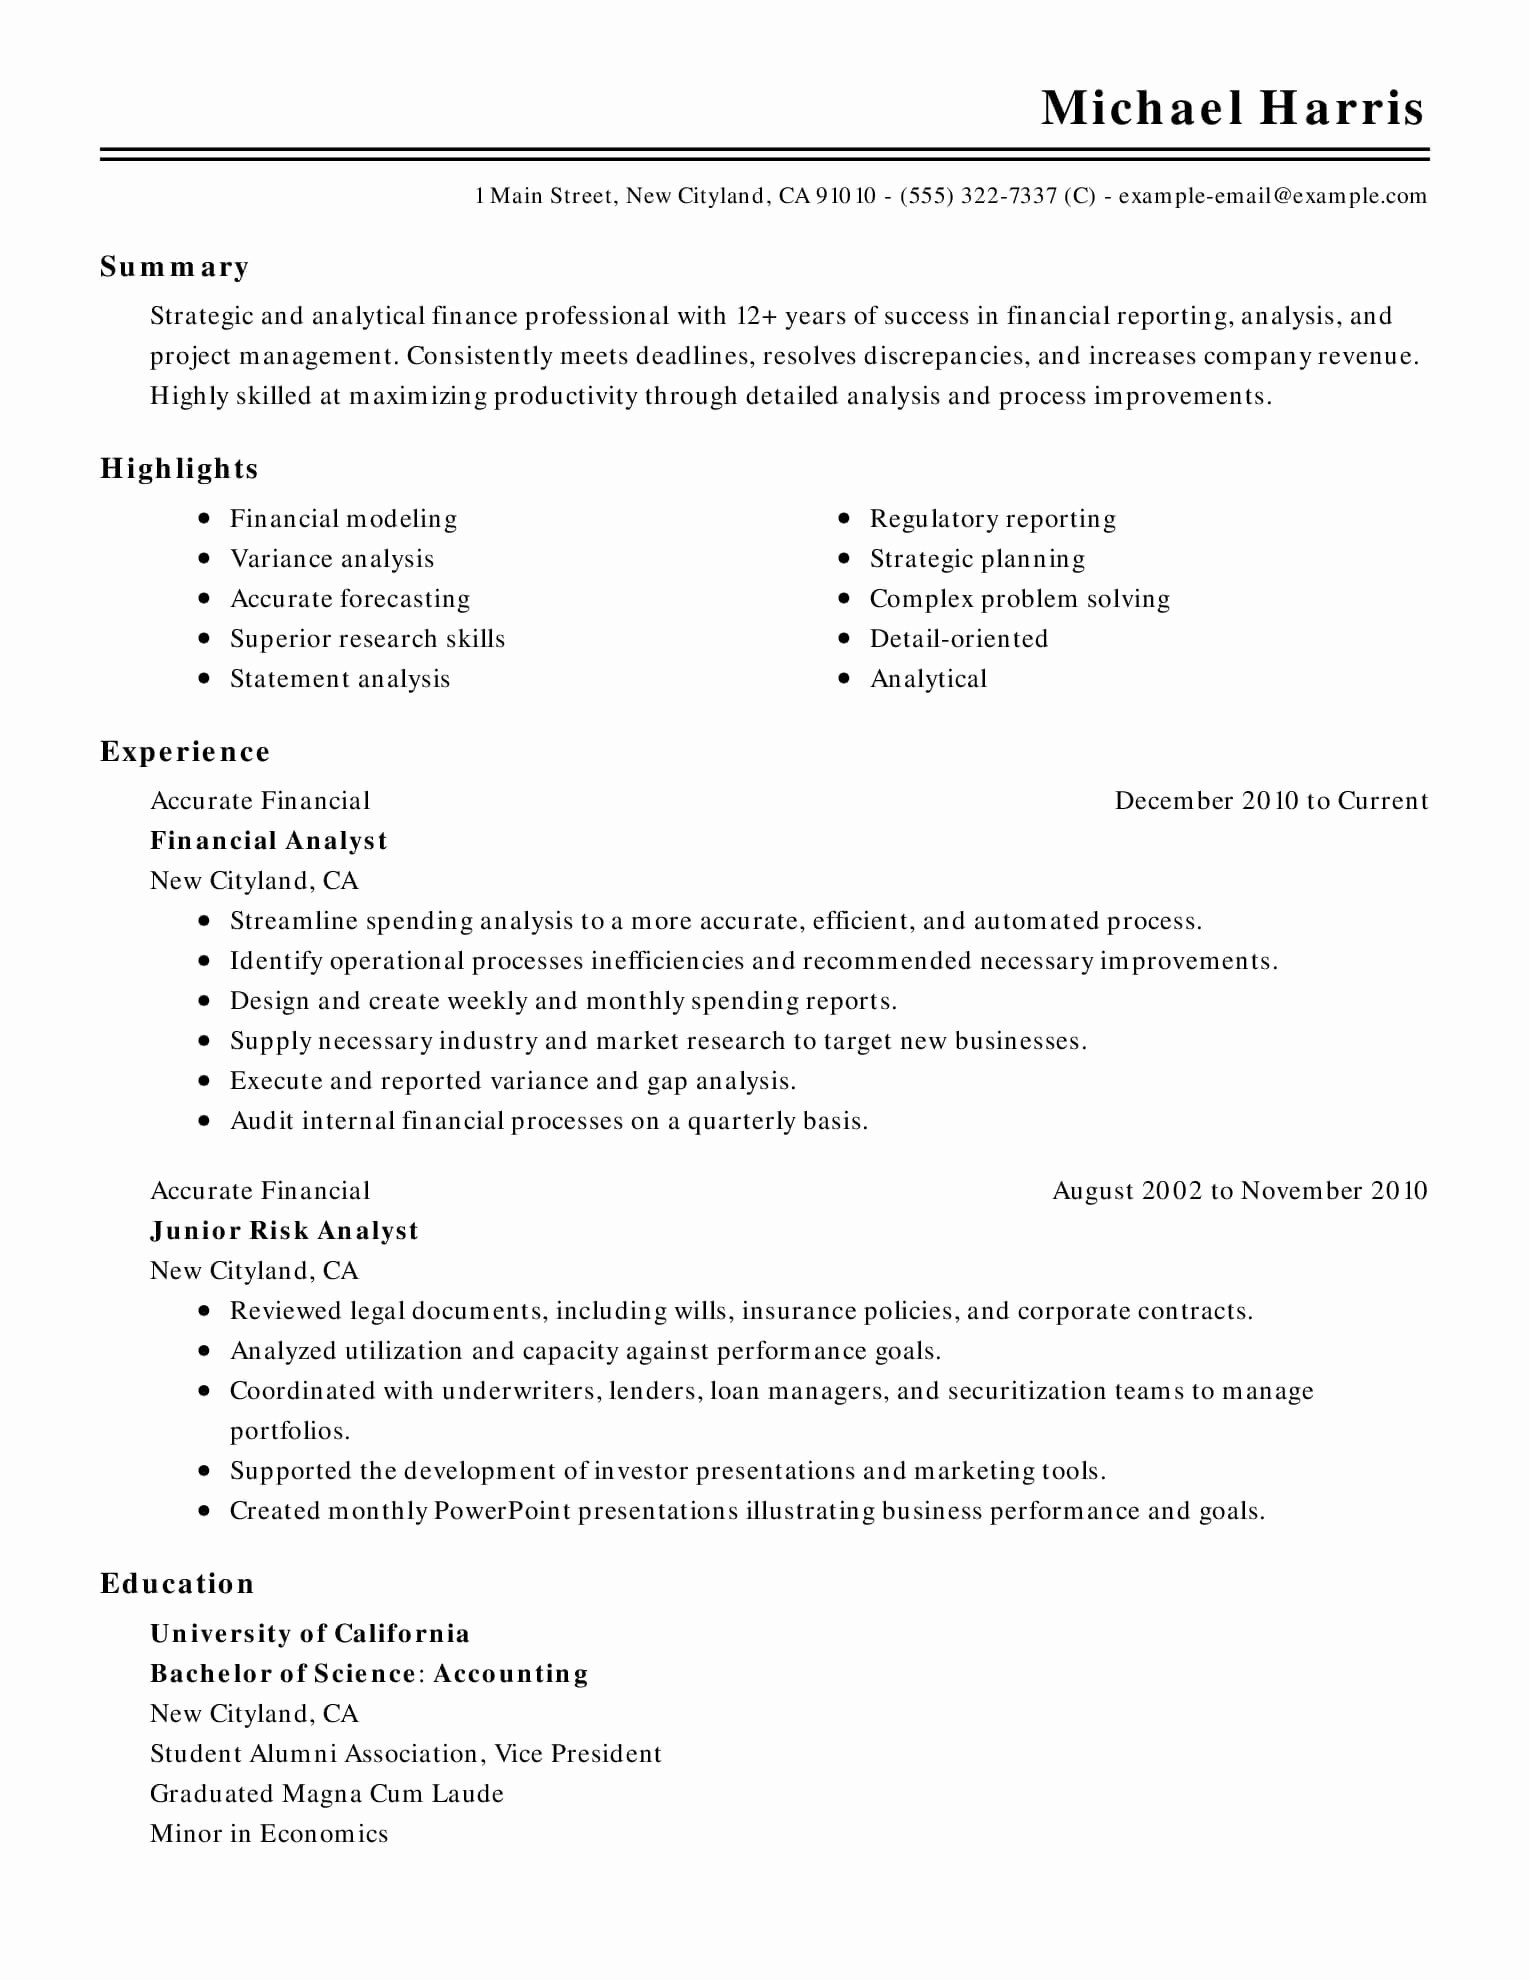 Cv format Samples In Word Best Of 15 Of the Best Resume Templates for Microsoft Word Fice